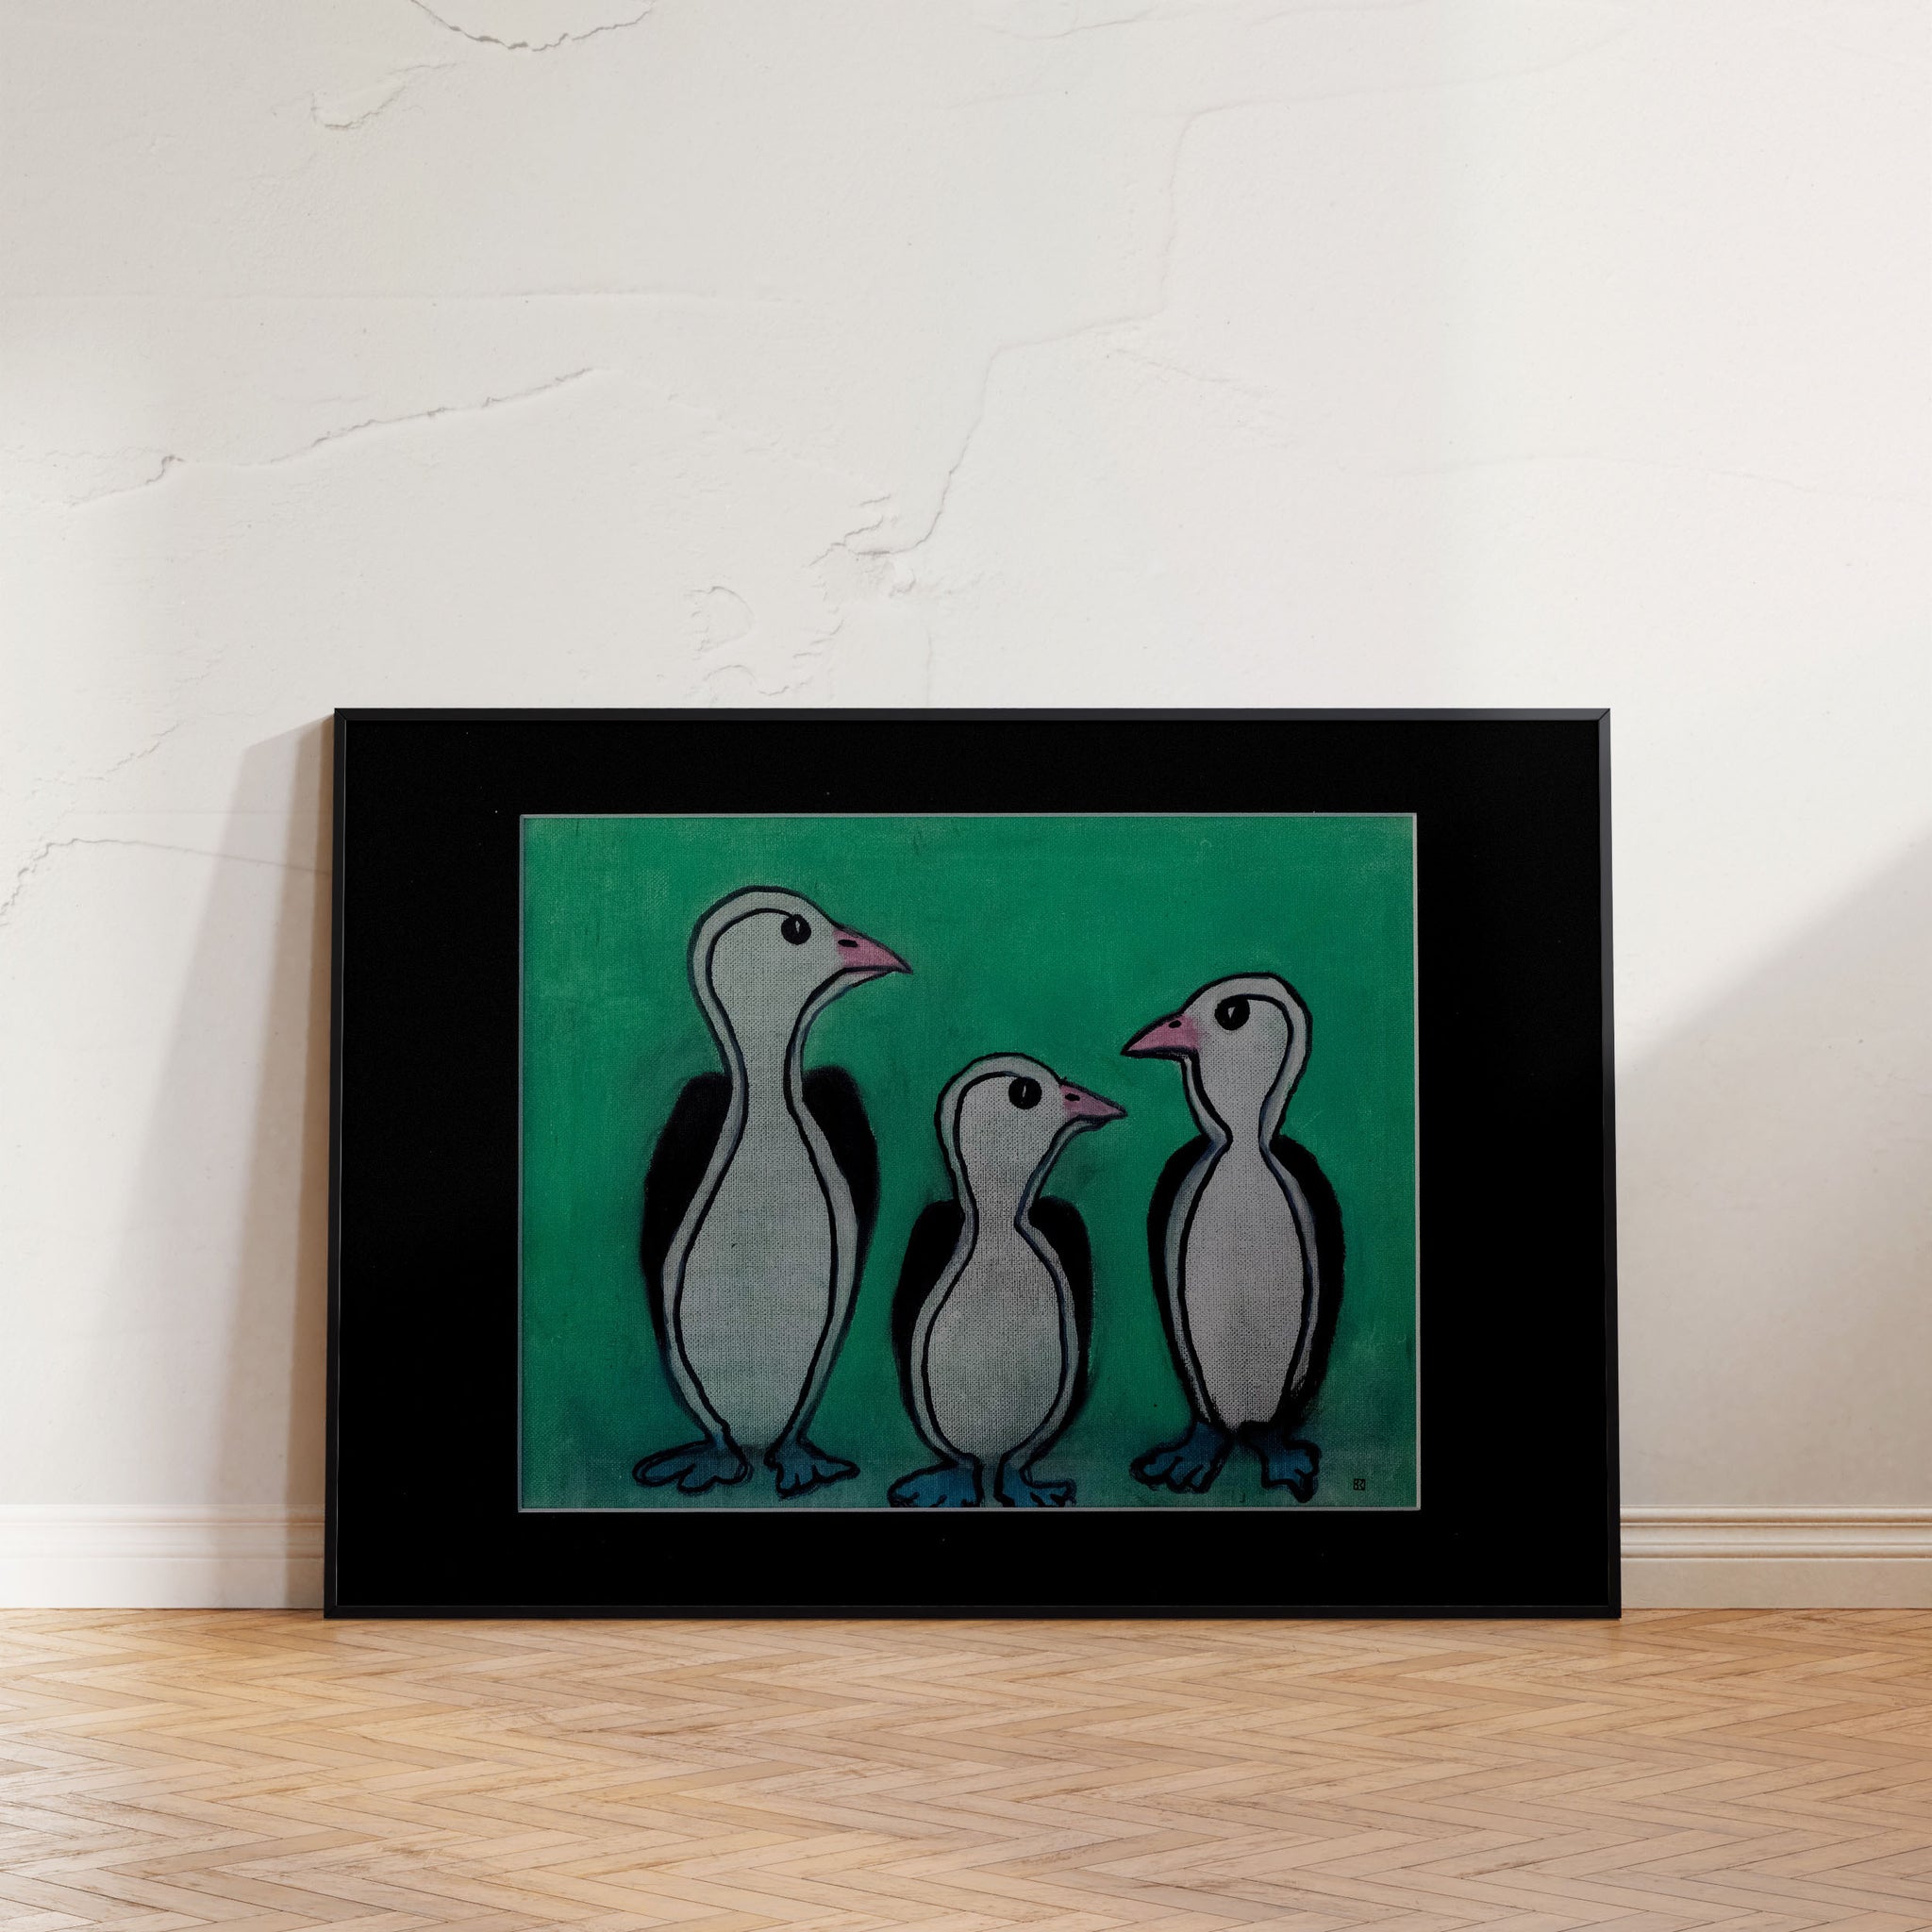 "Brian Findleton's minimalist artwork, Huddle Hype, captures animated penguins in an exciting interaction.”